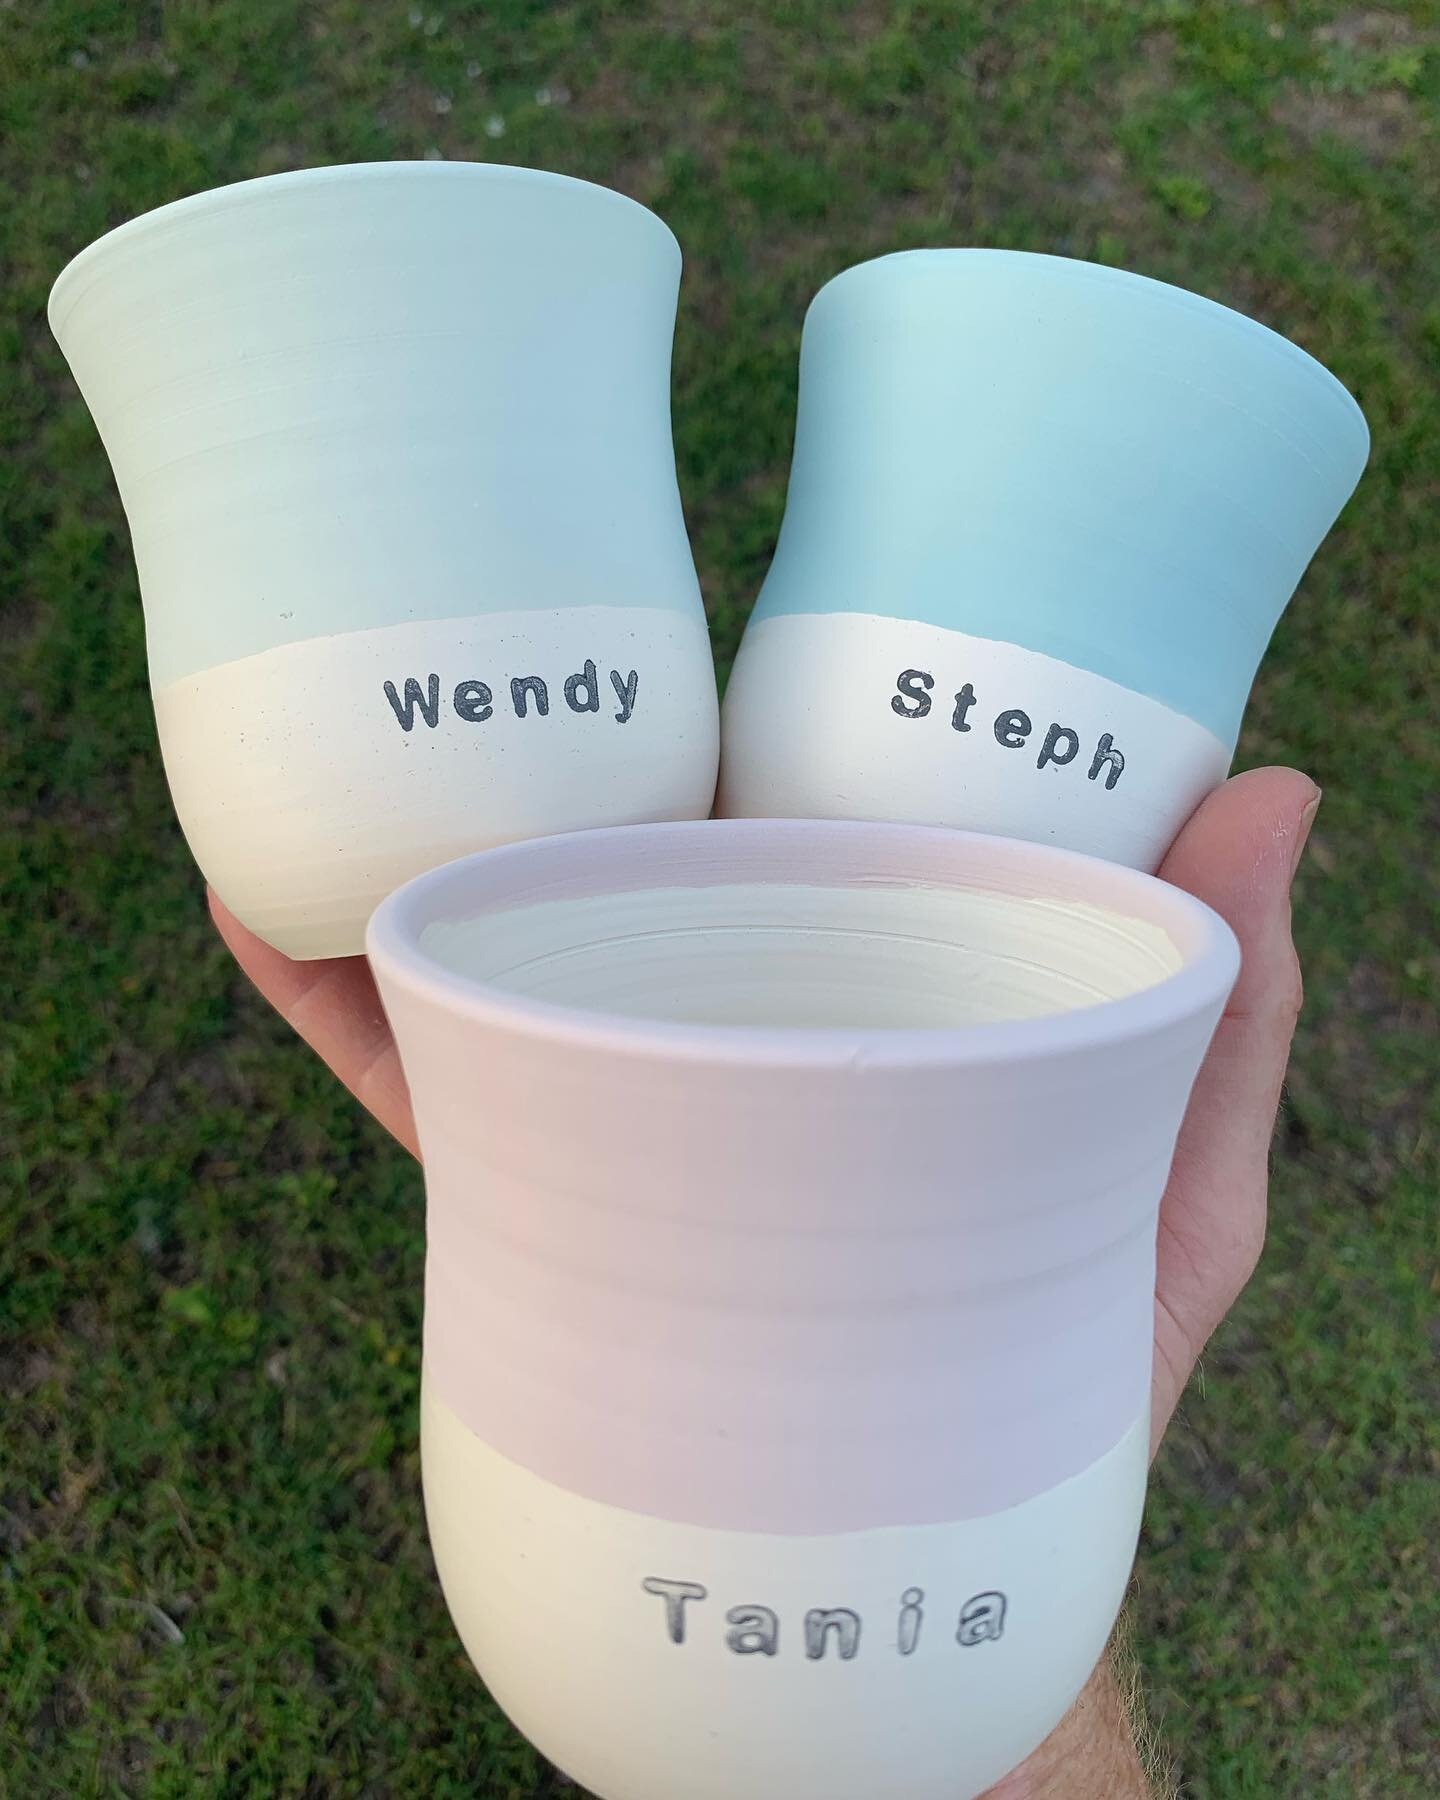 Cups for family and friends with names on them are a wonderful personalised gift for Christmas! These ones glazed and ready to fire! #theceramicmill #keepcup #travelcup #handmade #greenteam #sustainable #customtravelcup #travelmug #waronwaste #coffee